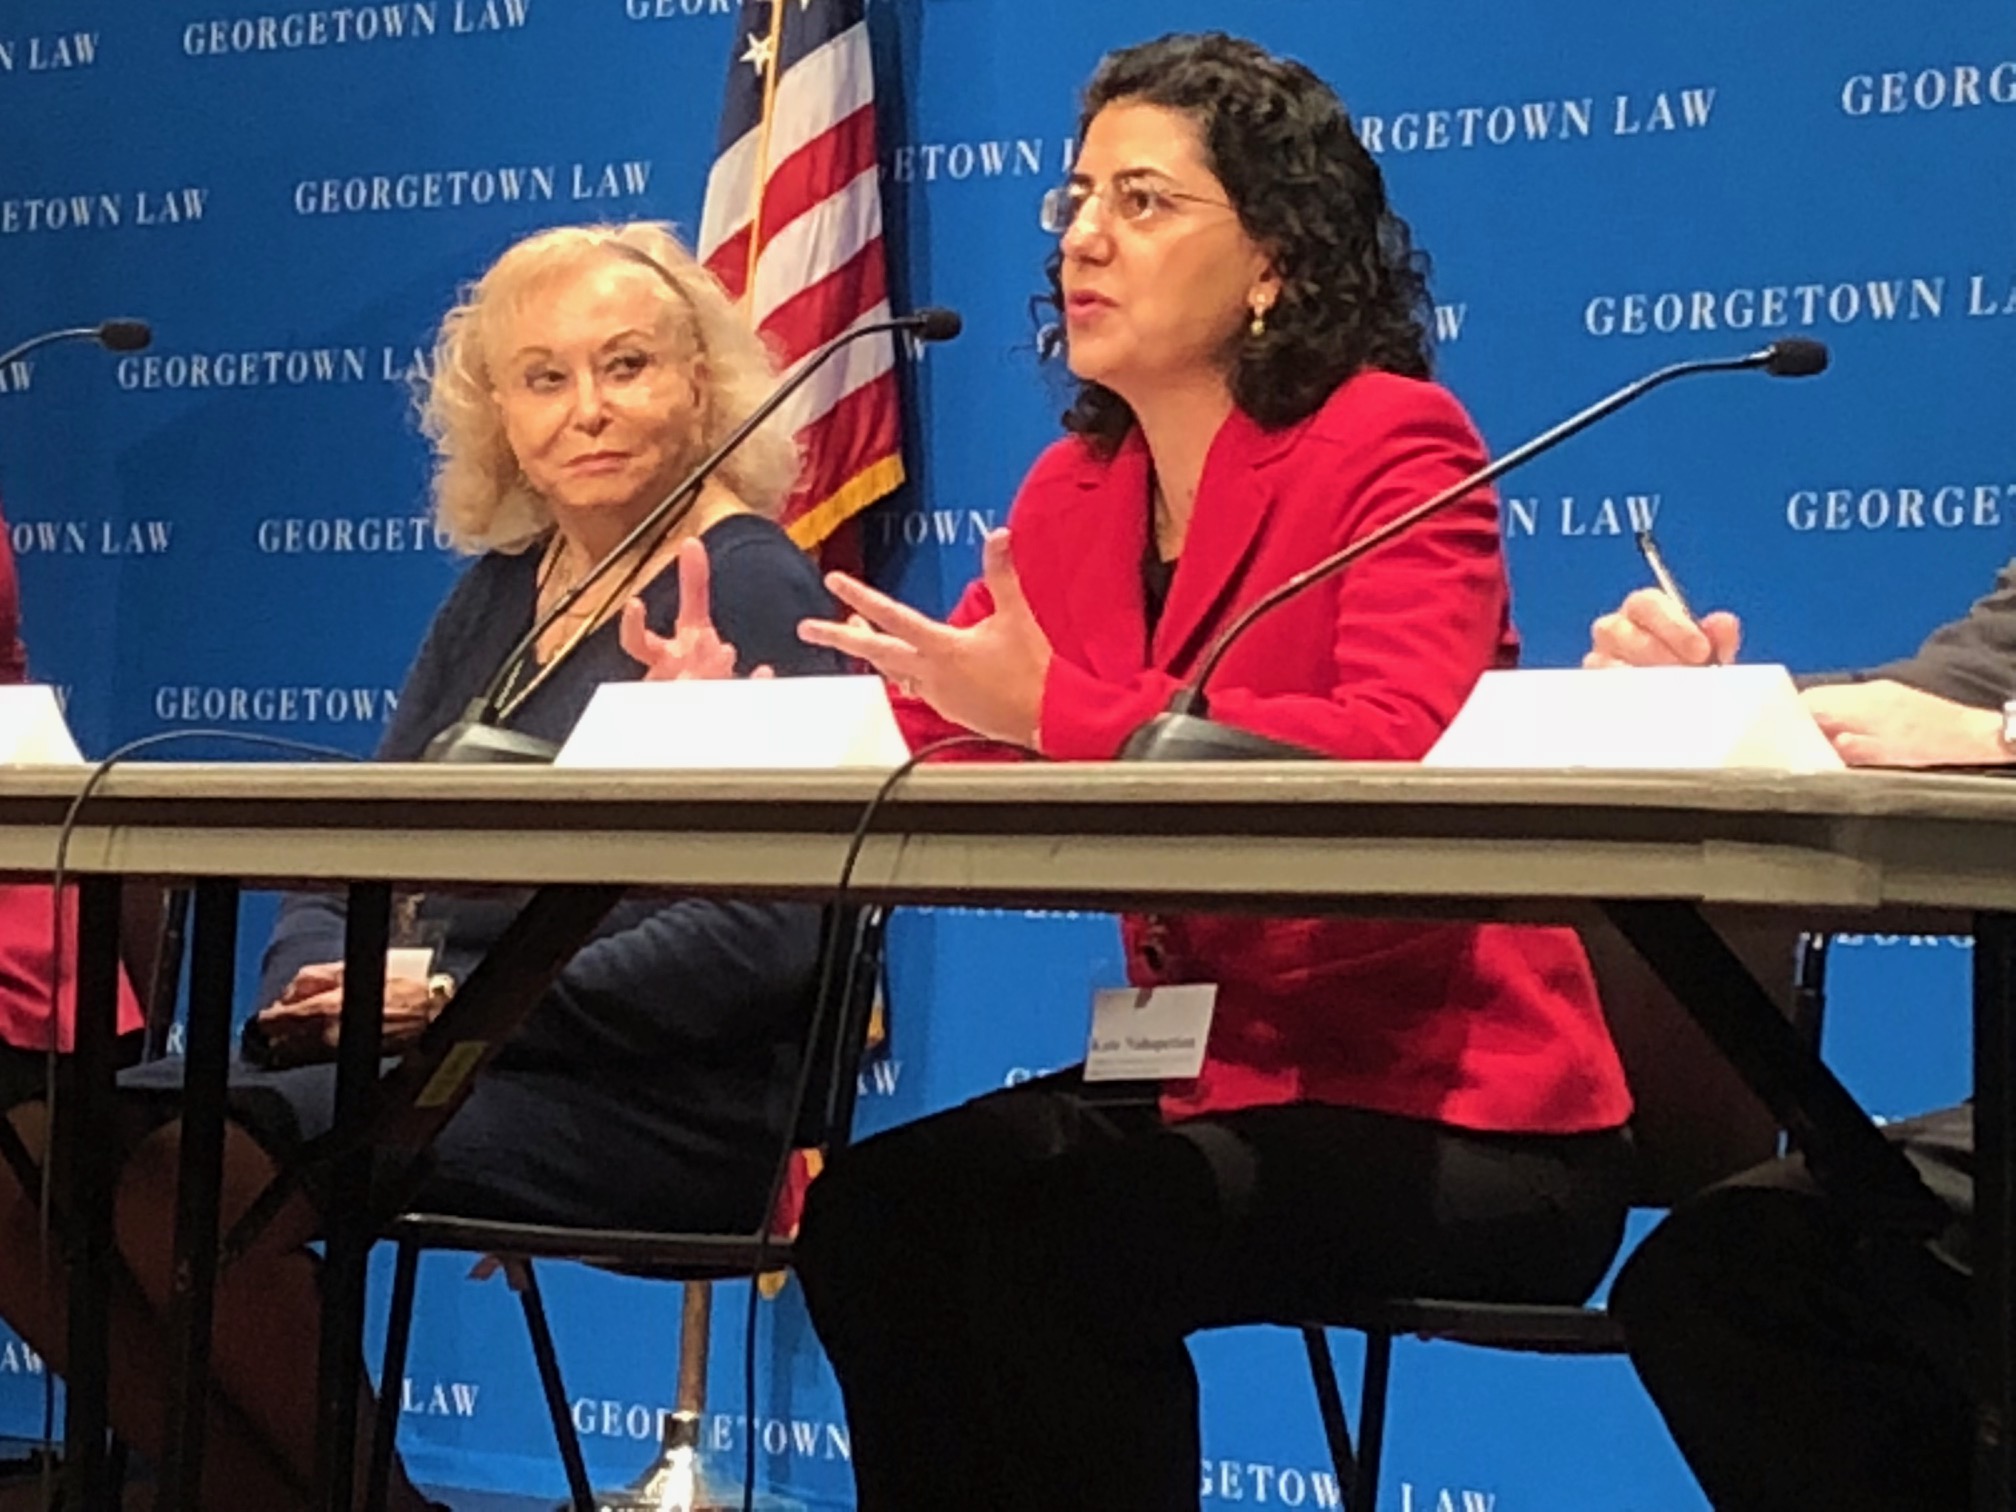 Armenian Legal Center’s Nahapetian Discusses Genocide Accountability at Georgetown Law Symposium